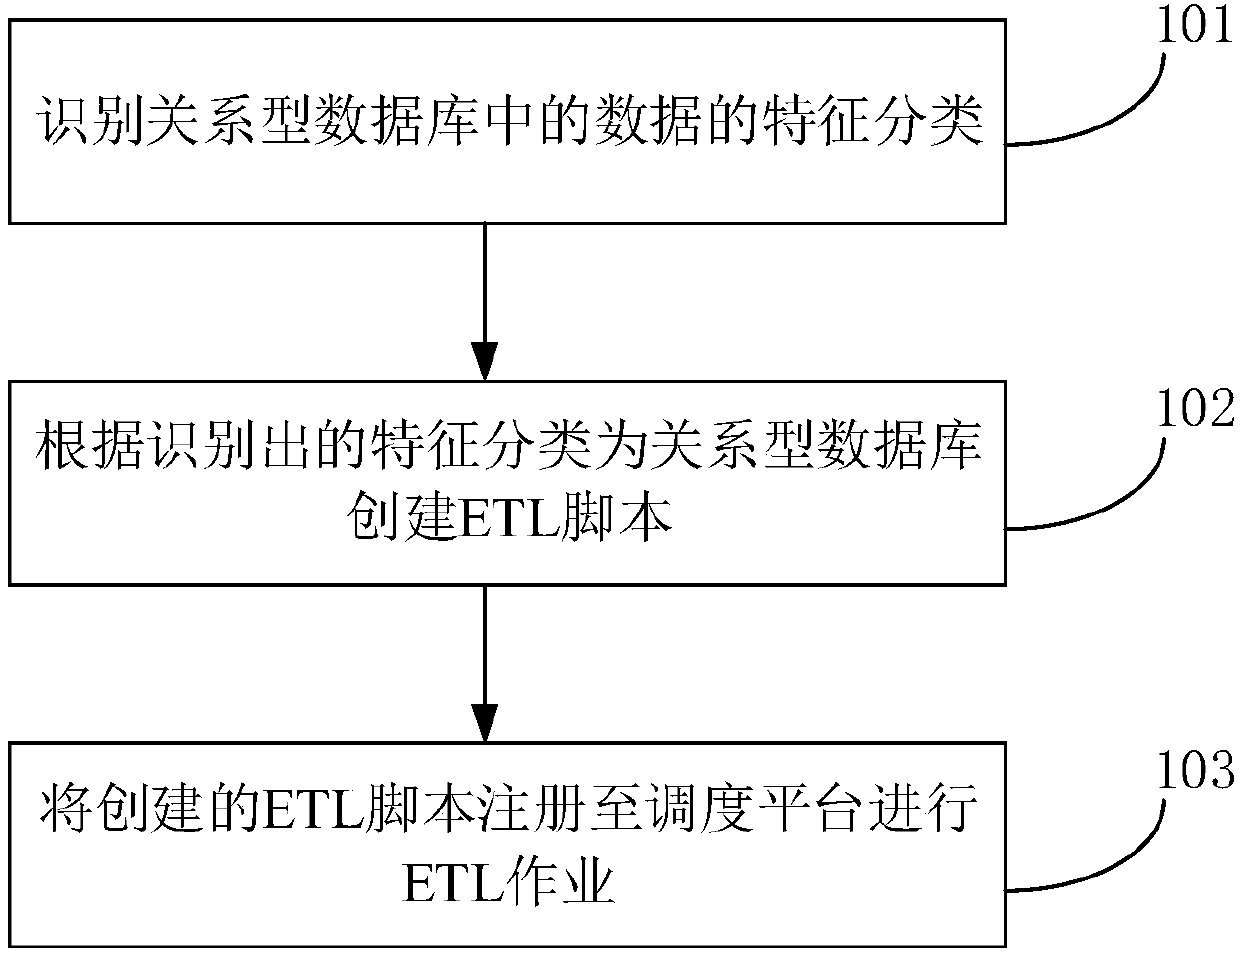 Method for creating ETL scripts from relational database to Hive